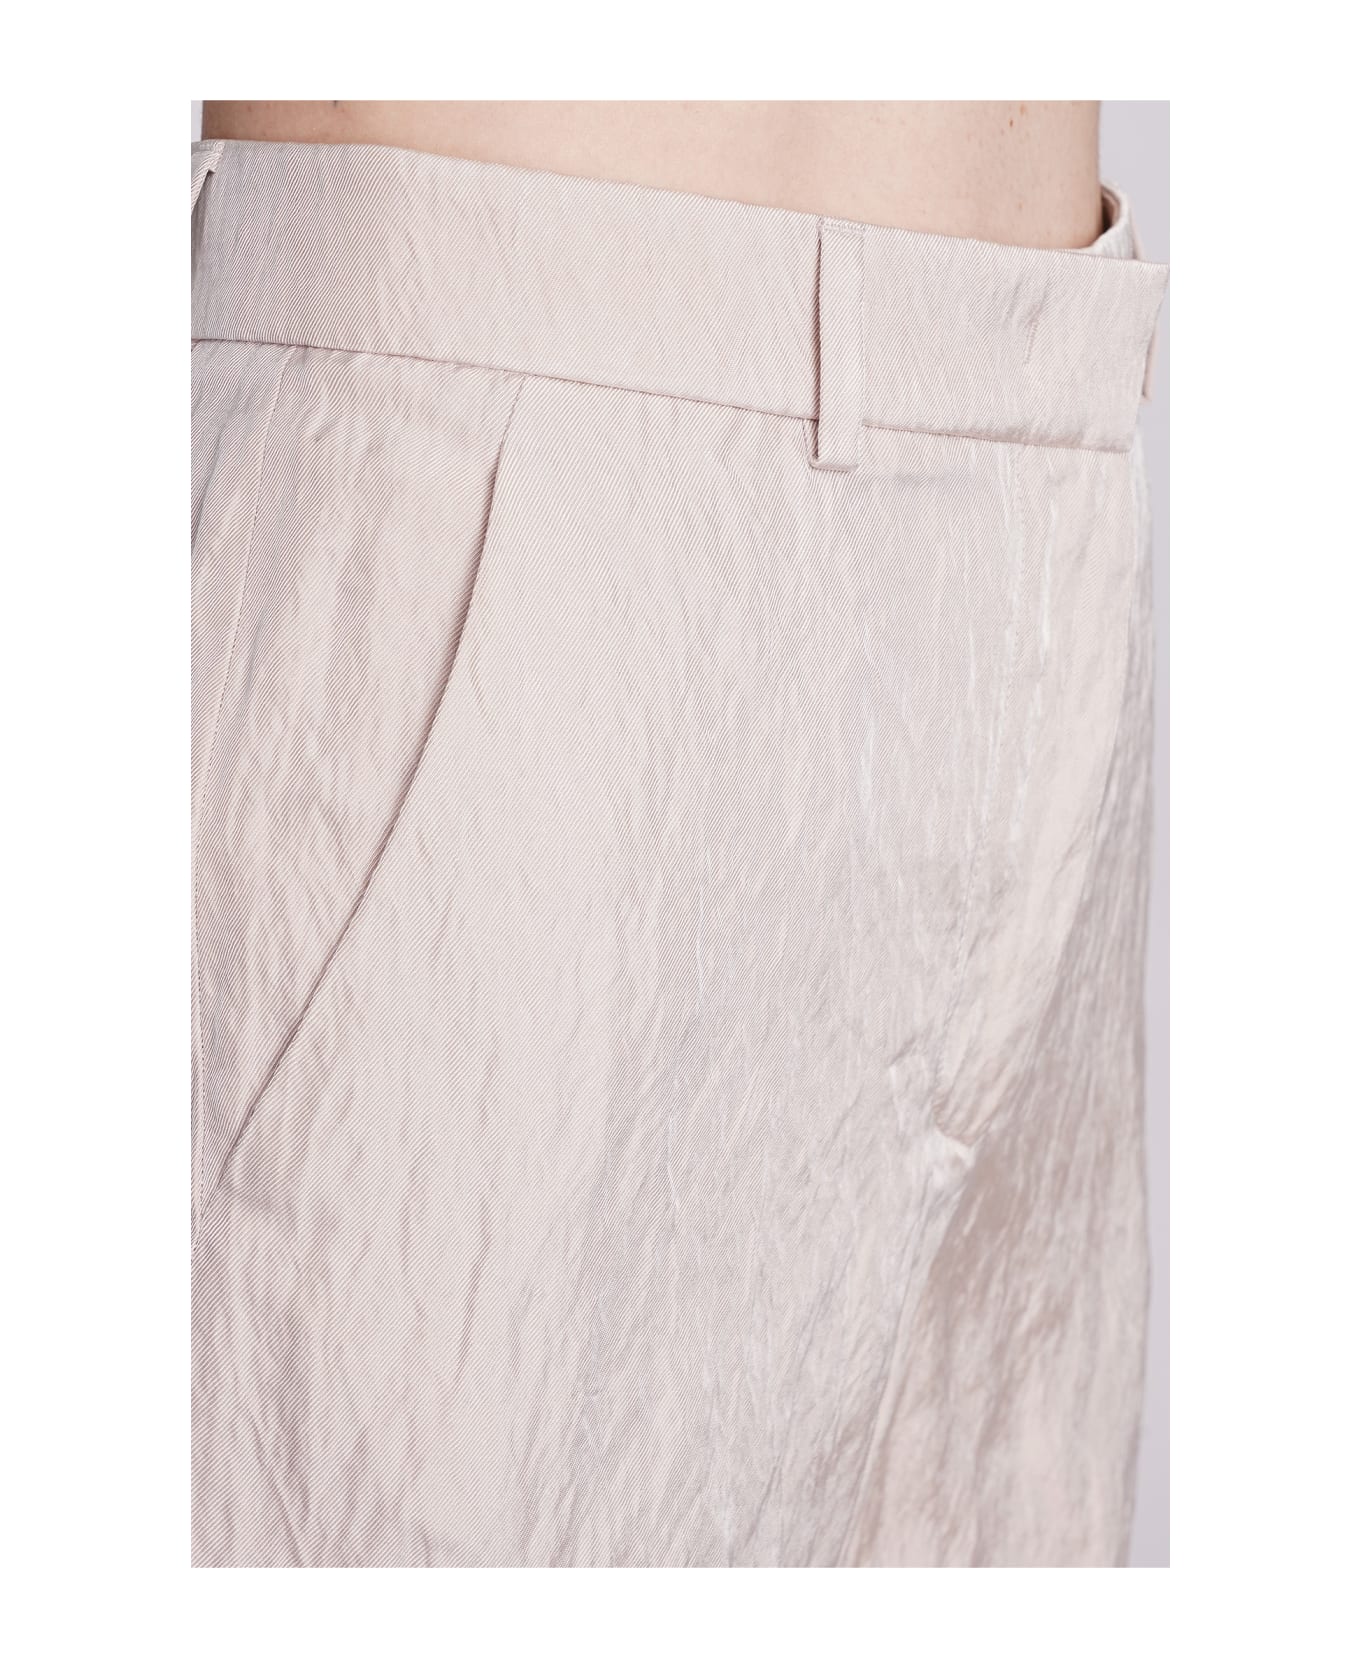 Giorgio Armani Concealed Trousers - rose-pink